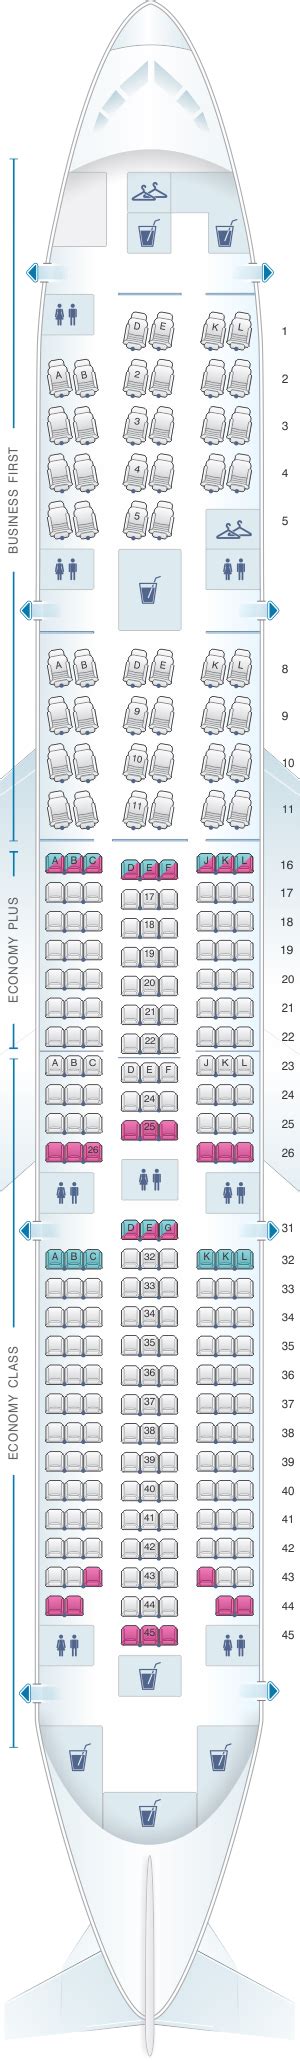 Premium seat. Crew seat. Power port. Emergency exit. Galley. Lavatory. Closet. Bassinet. For your next American Airlines flight, use this seating chart to get the most comfortable seats, legroom, and recline on .